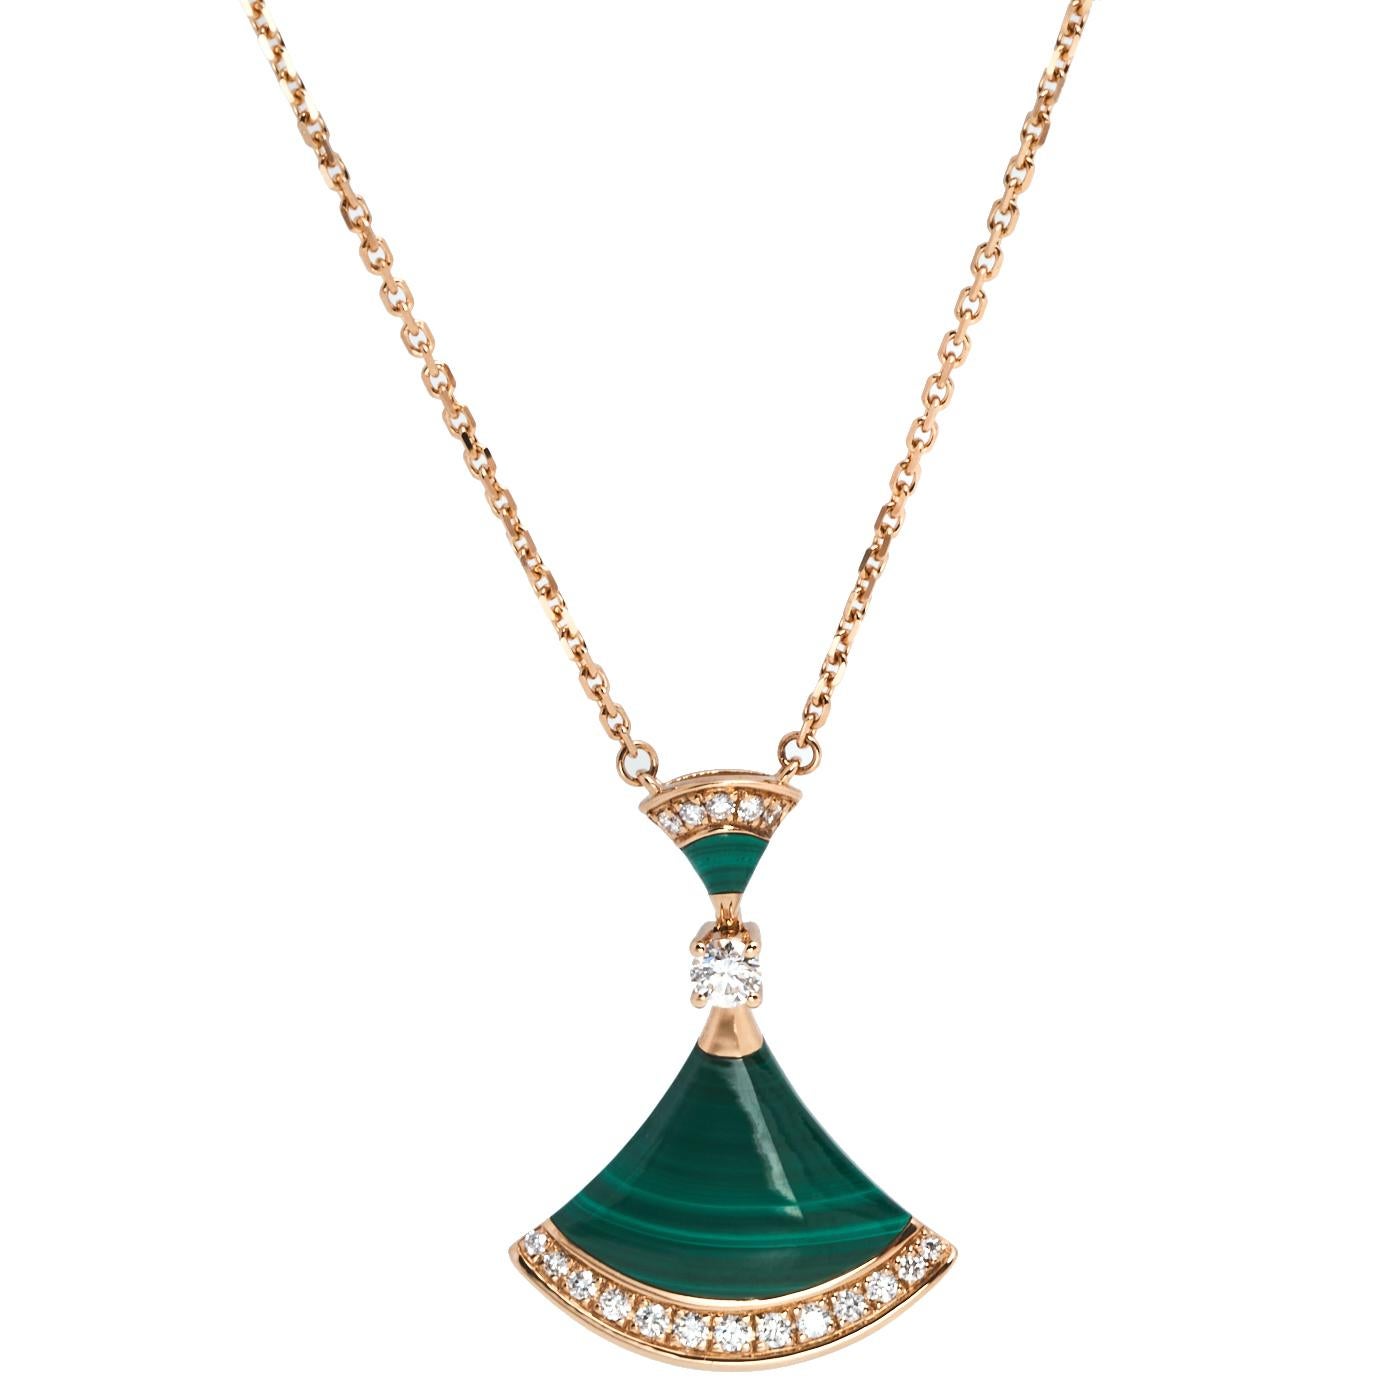 Truly meant for a diva like you, this Divas' Dream necklace is from Bvlgari. It has been magnificently crafted from 18k rose gold and designed with a fan-shaped pendant that has diamonds and malachite. The piece has been finely sculpted to exalt